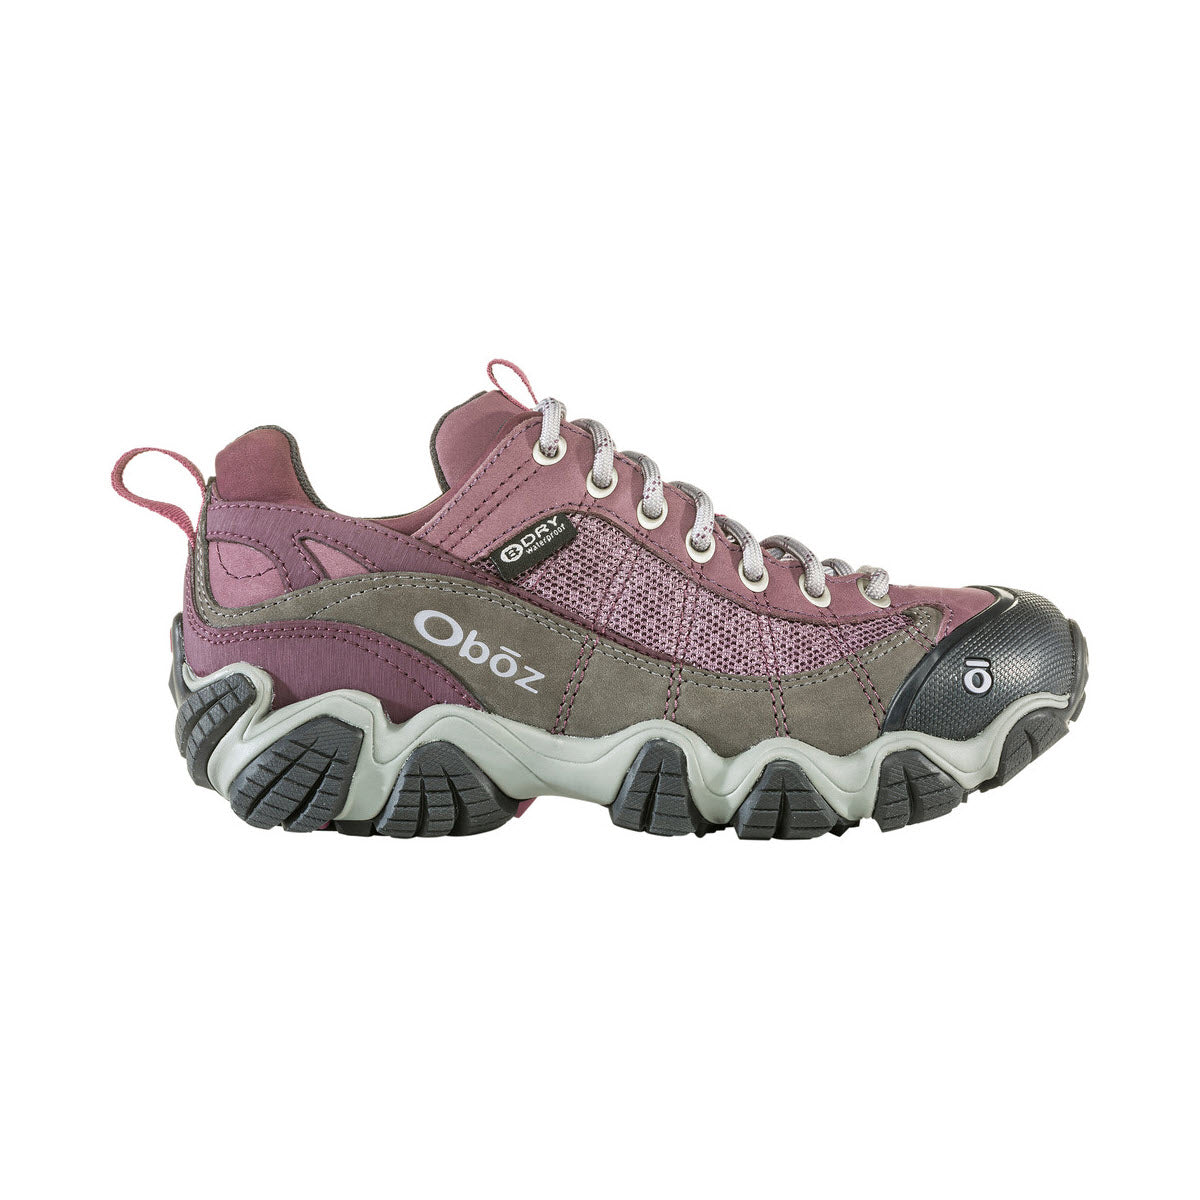 A pink and gray OBOZ FIREBRAND II LOW B DRY LILAC - WOMENS hiking shoe with a waterproof membrane and chunky soles, displayed against a white background.